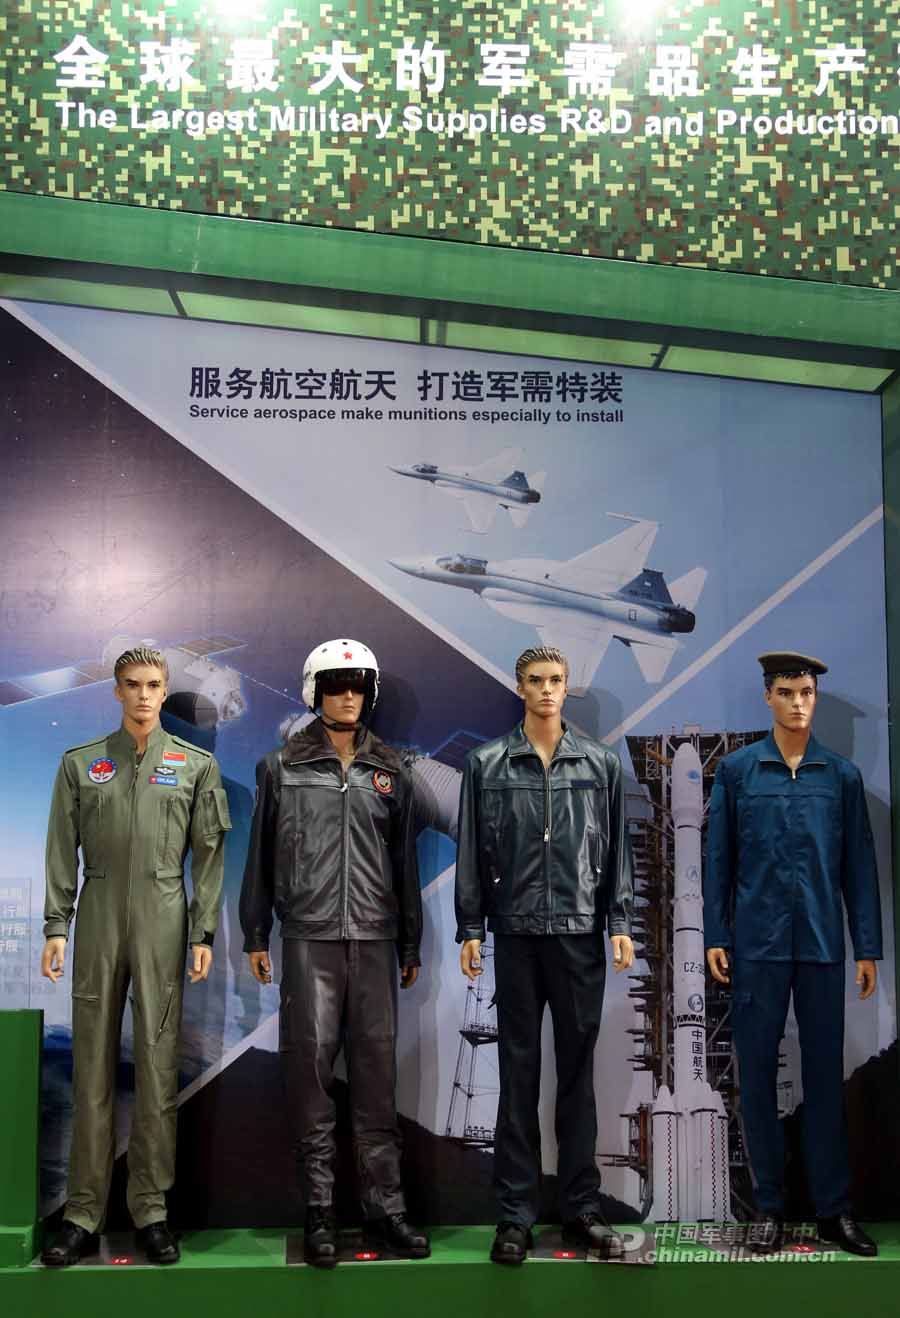 Quartermaster equipment is exhibited at the 9th China International Aviation & Aerospace Exhibition, which kicked off on November 12 in Zhuhai, Guangdong province. (China Military Online/Qiao Tianfu)